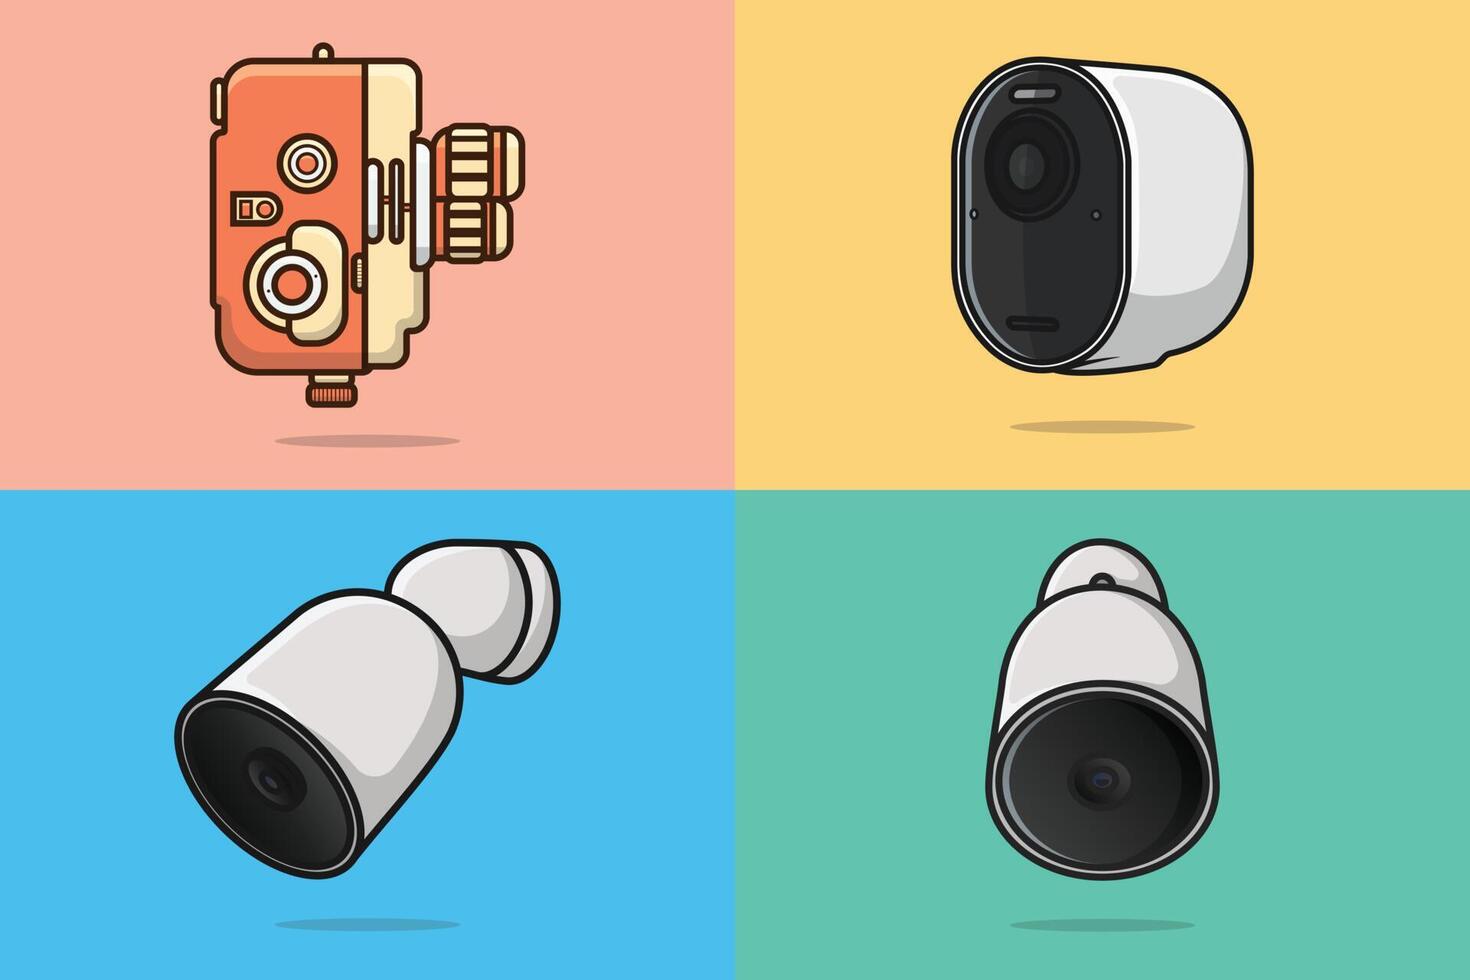 Collection of Digital Cameras vector illustration. Science and technology objects icon concept. Digital CCTV Cameras and Photography or Shooting Camera vector design. Home and City security system.